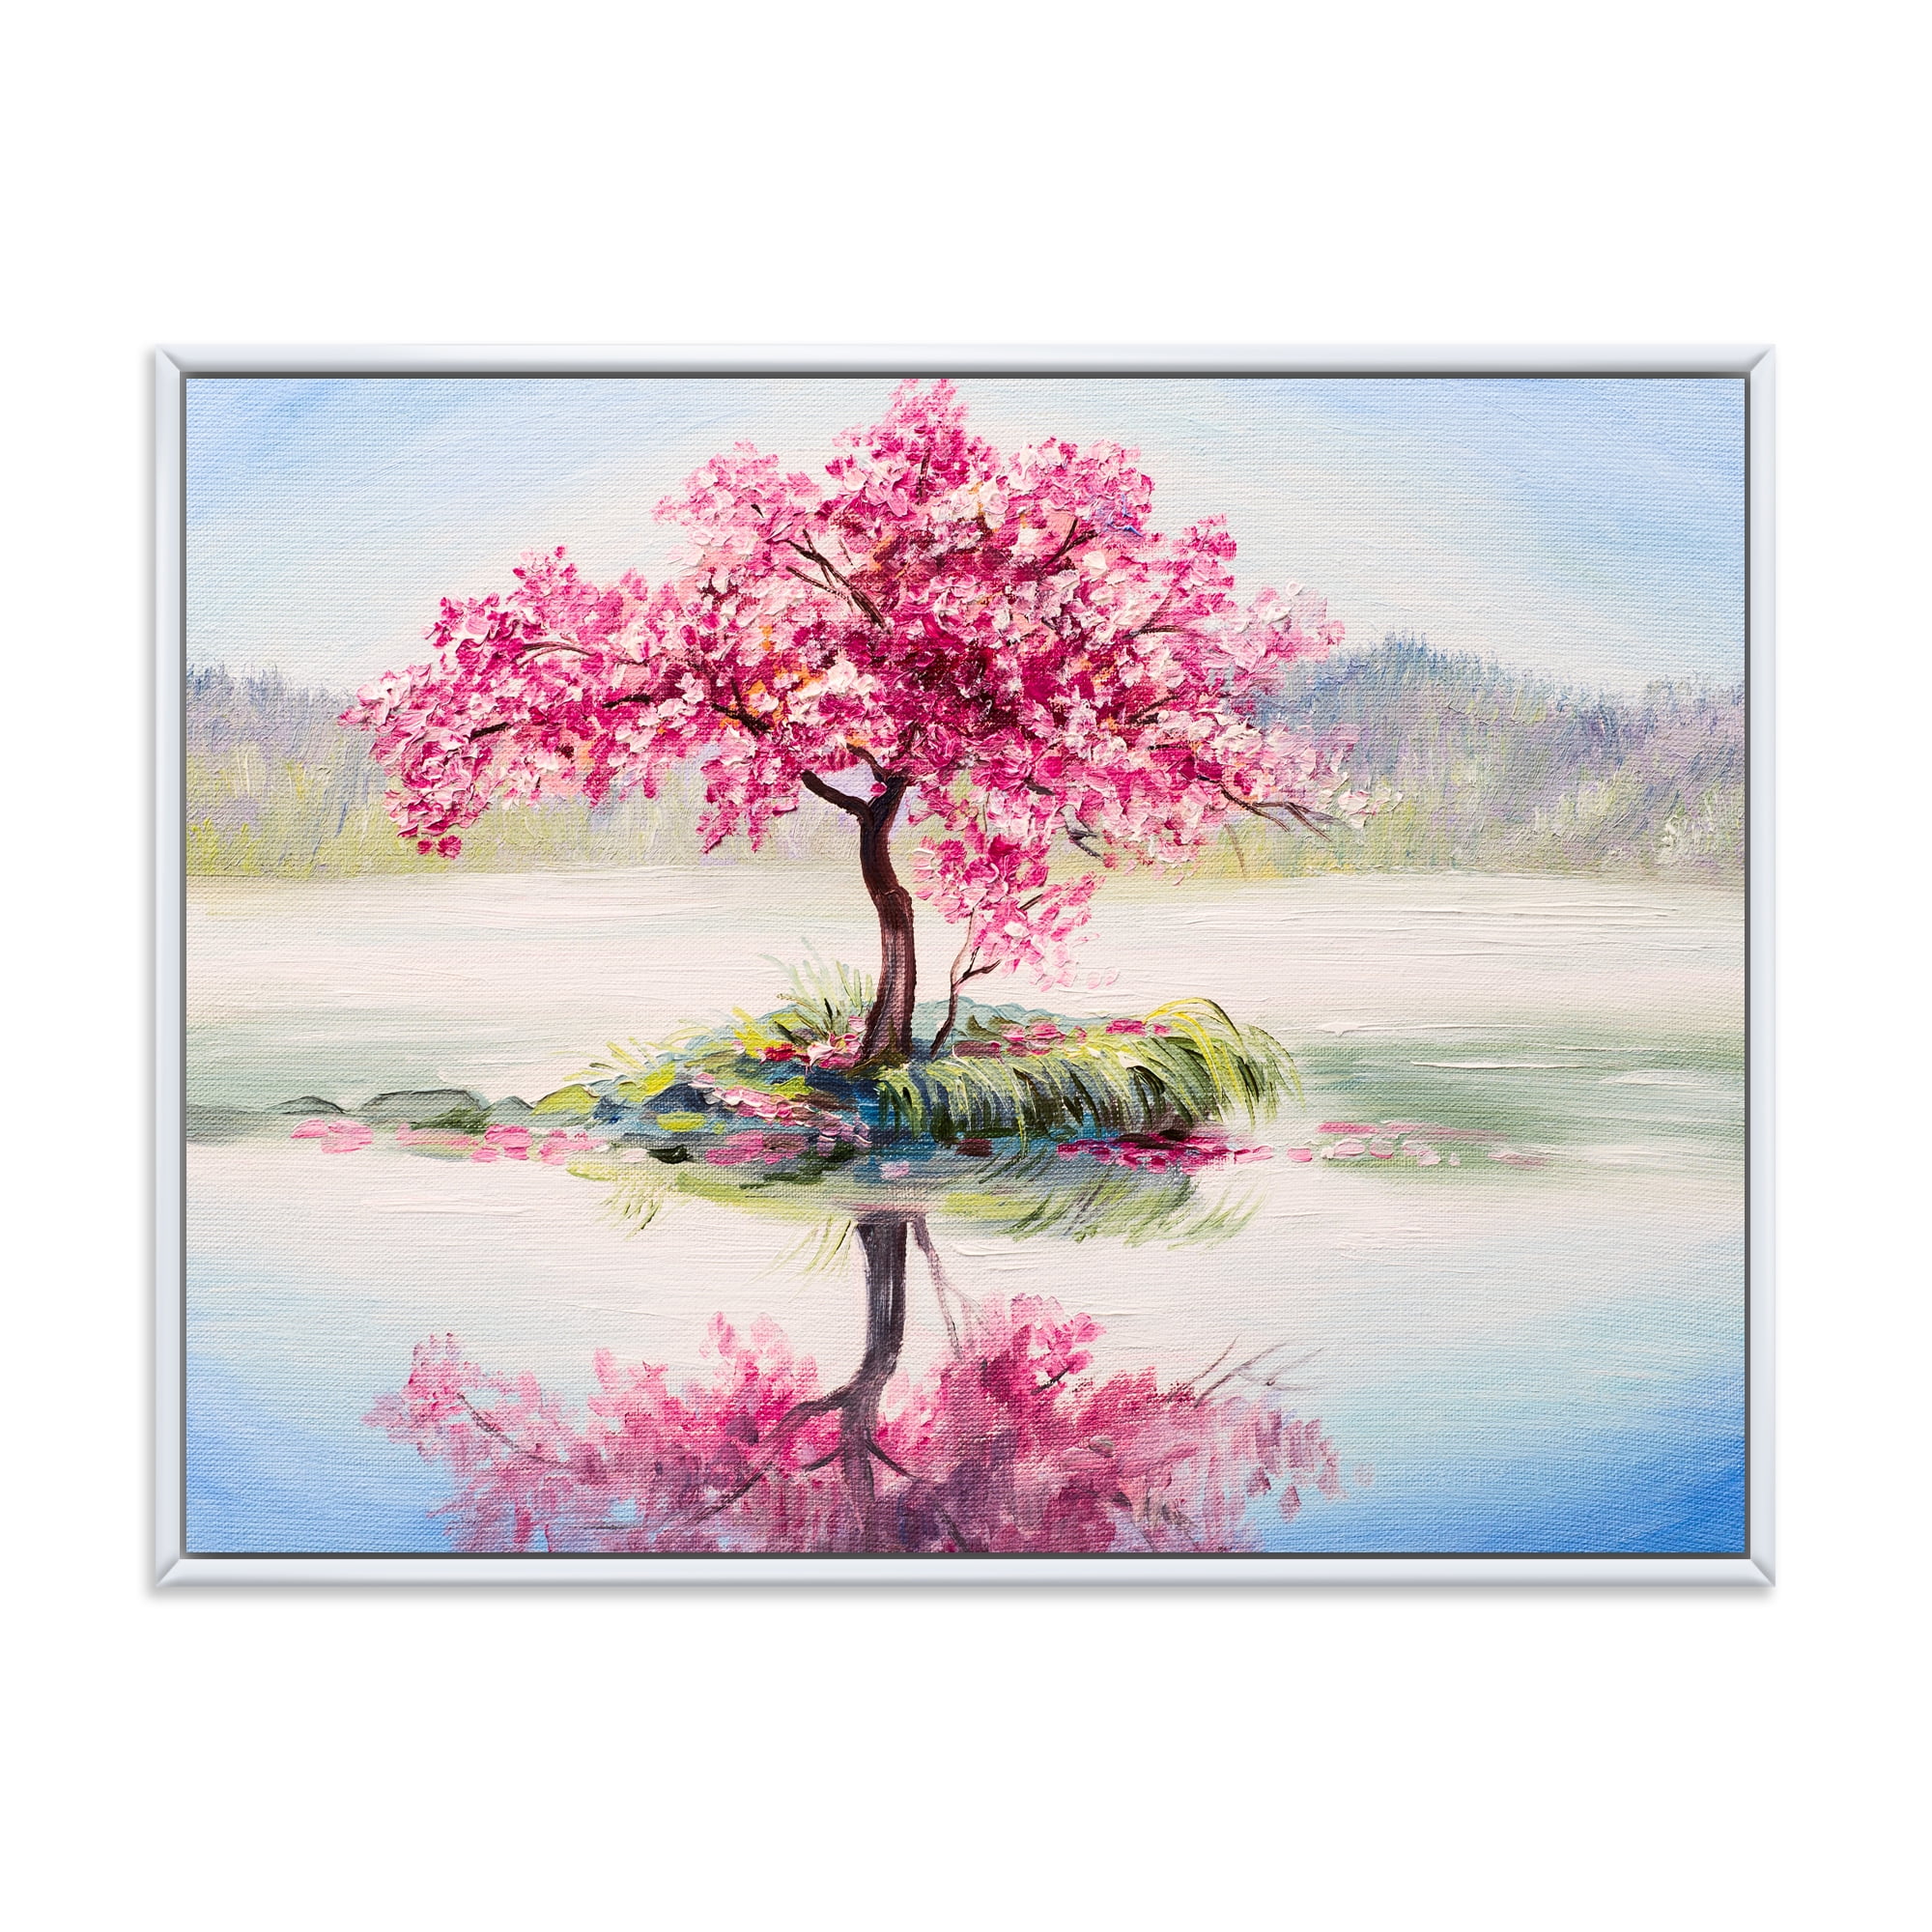 Beautiful Blossom Cherry Tree Picture Print ON Framed Canvas Wall Art Home 